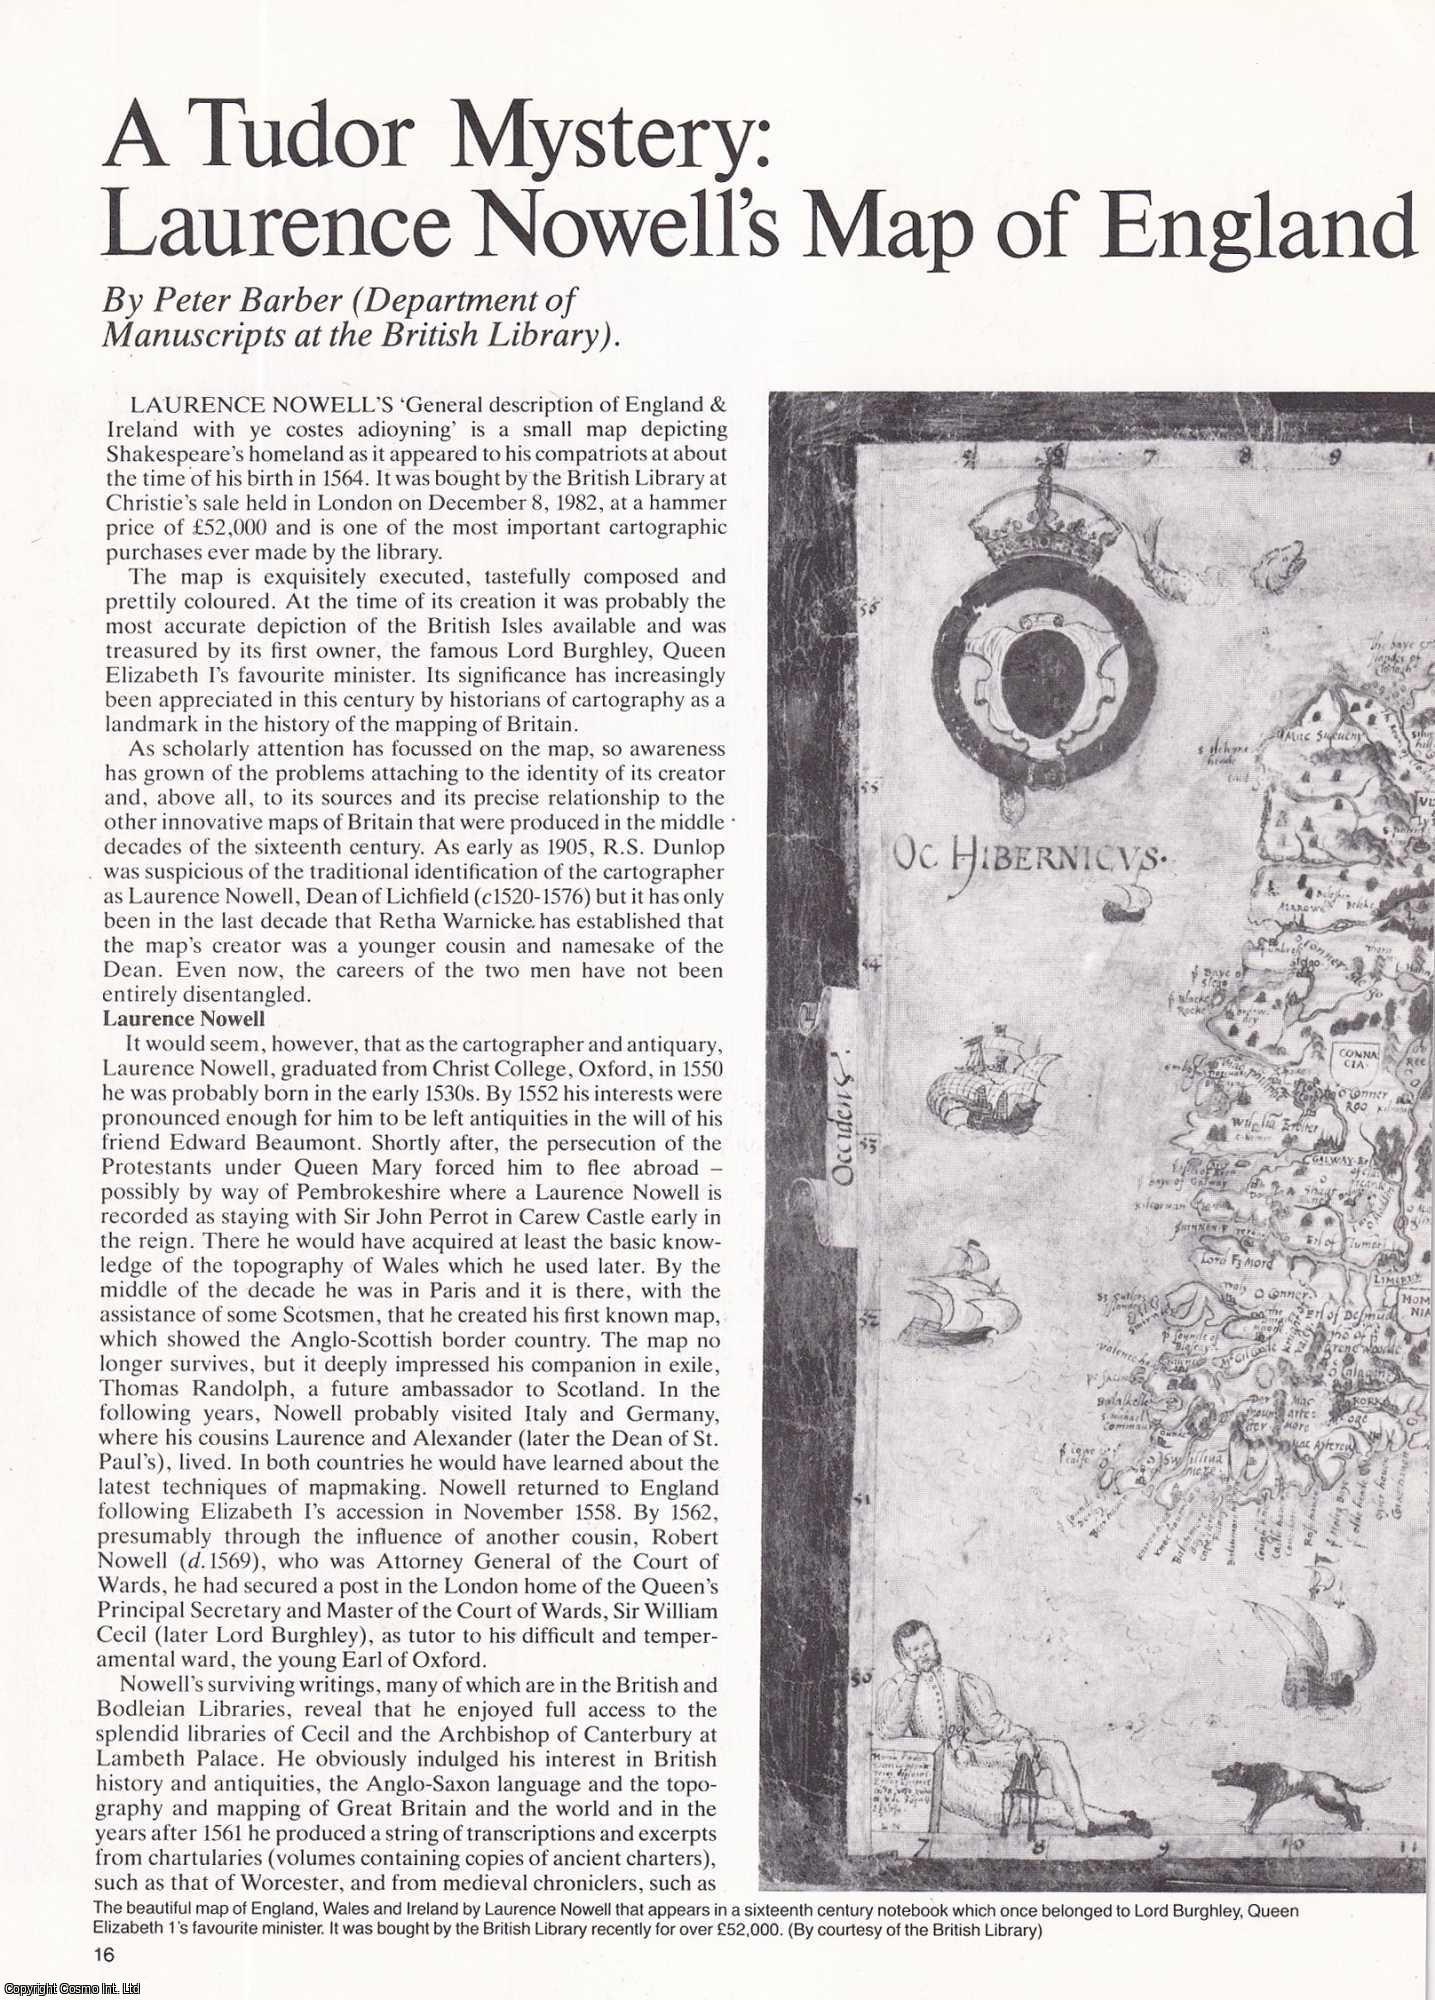 Peter Barber - Laurence Nowell's Map of England and Ireland: A Tudor Mystery. An original article from Map Collector Magazine, 1983.